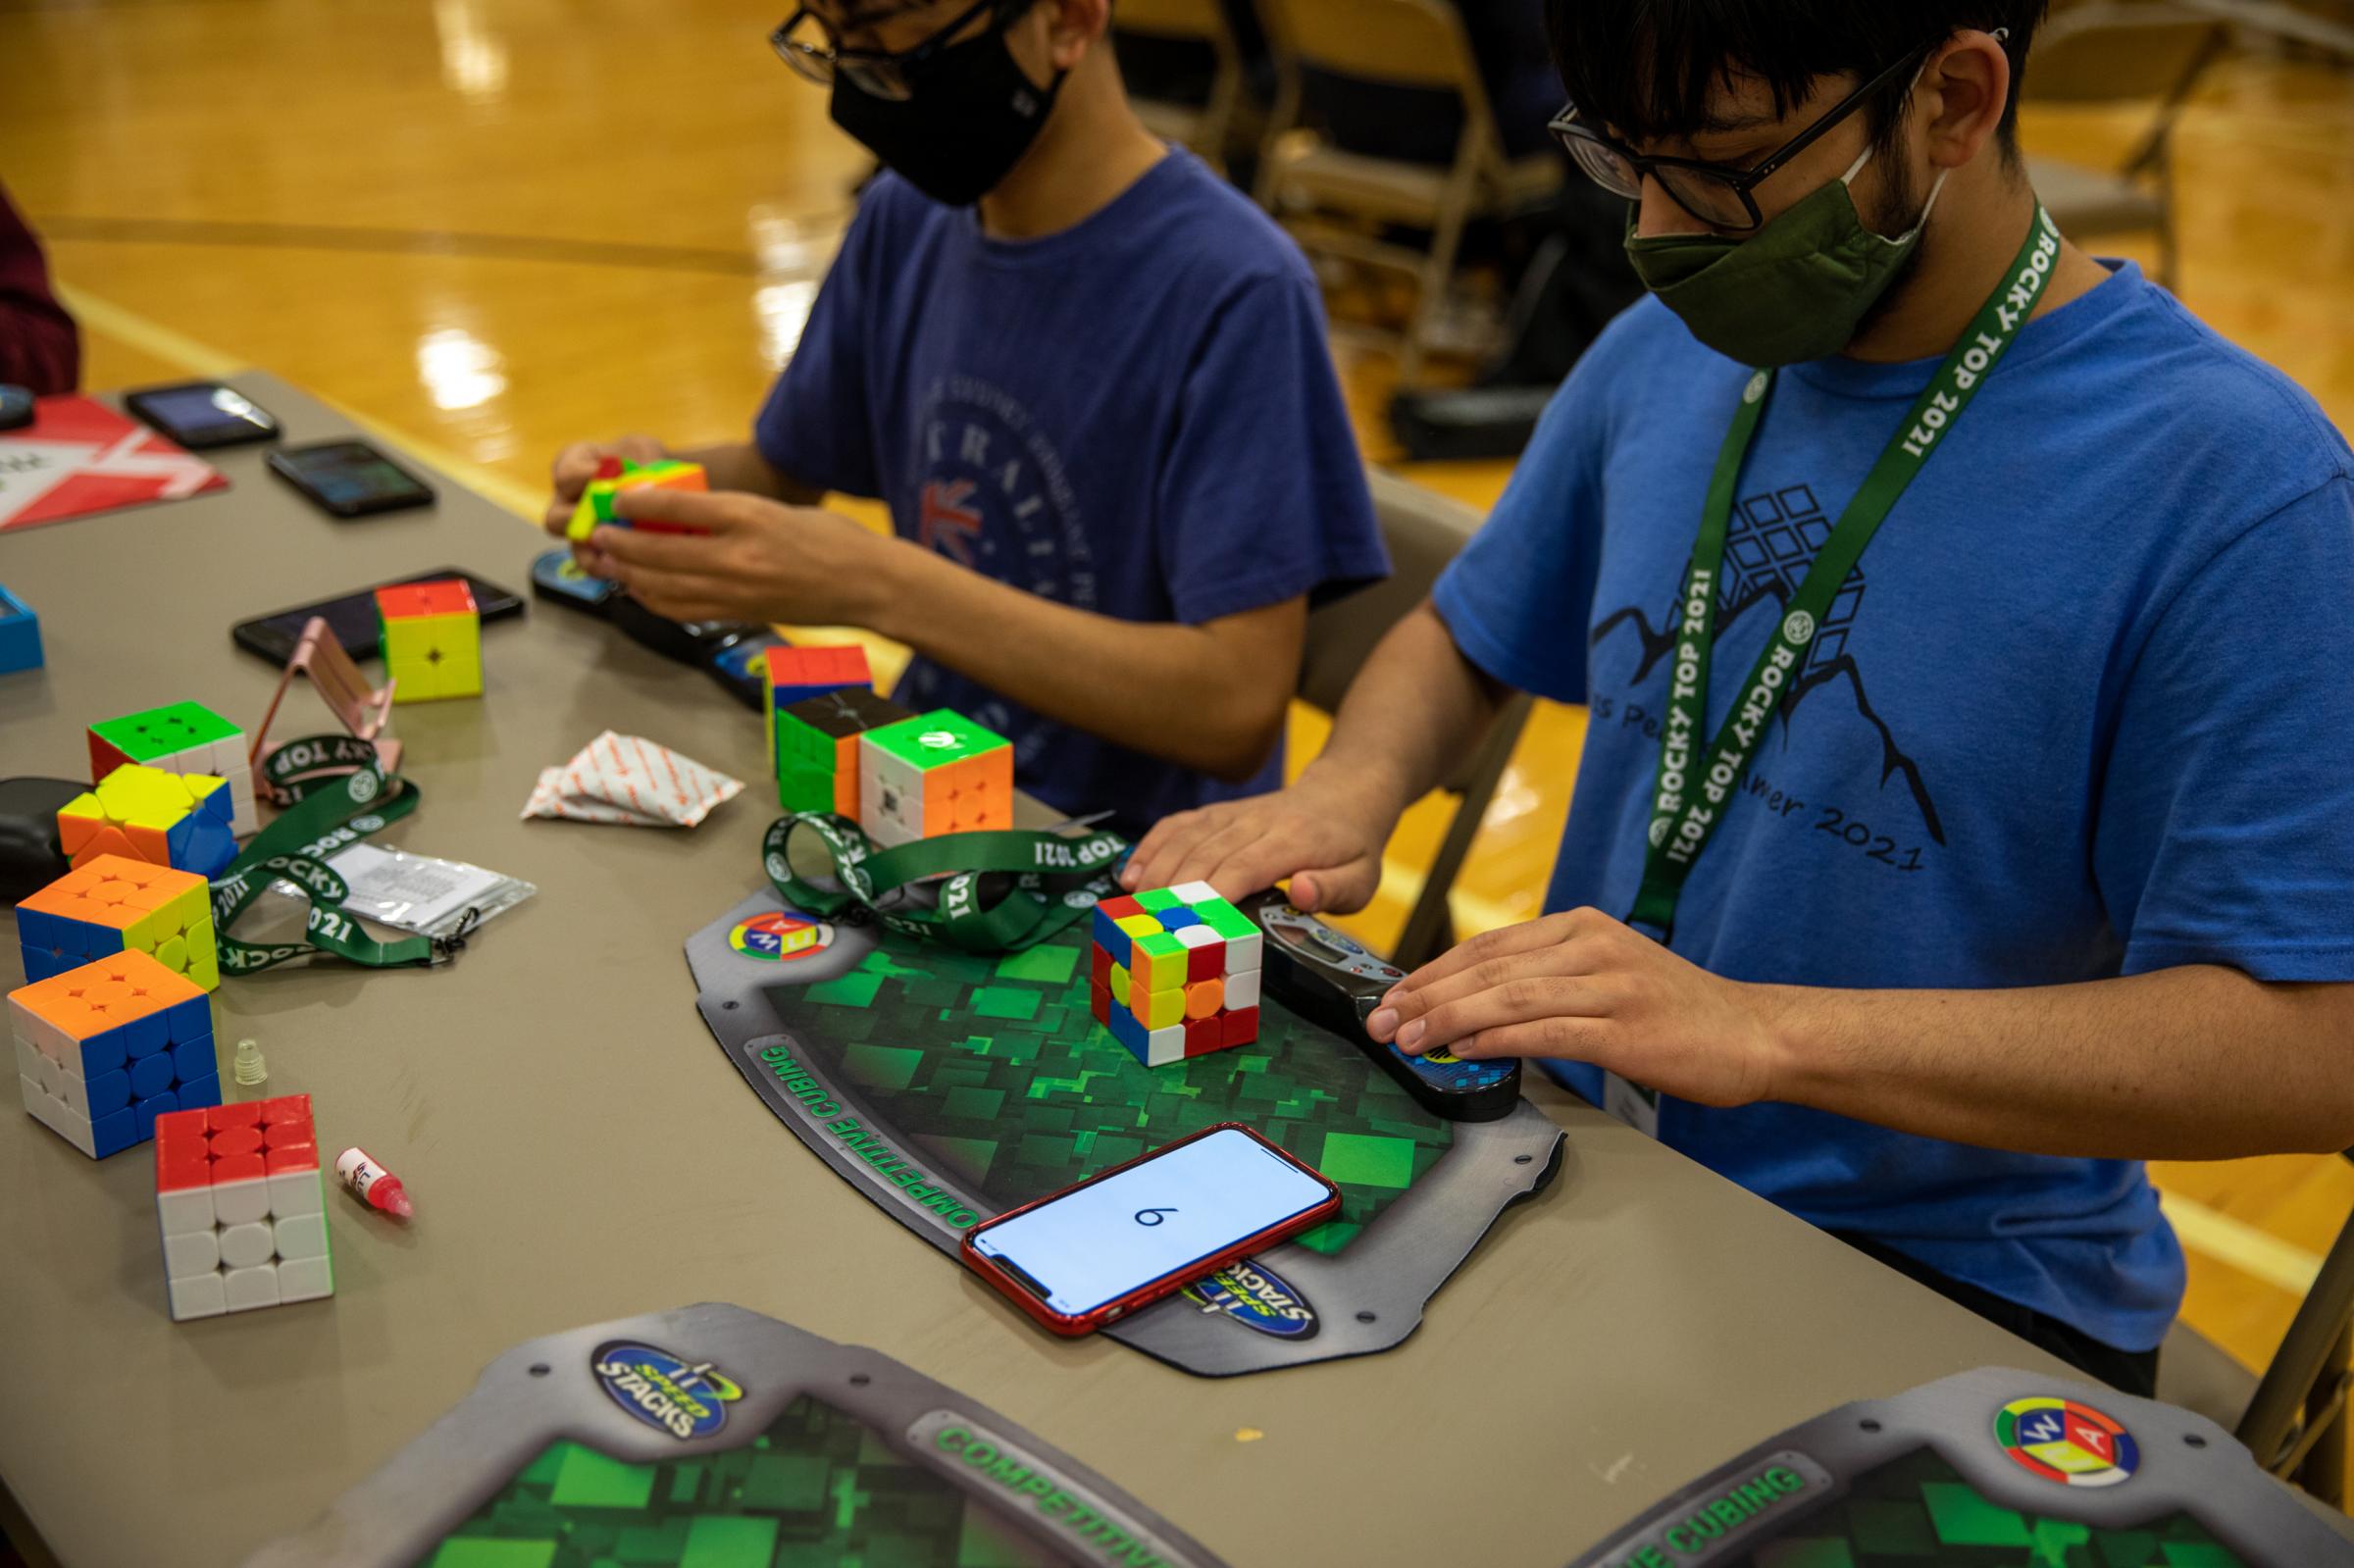 Speedcubers - Competitors practice at tables throughout the competition using their own speed cubing timer and...